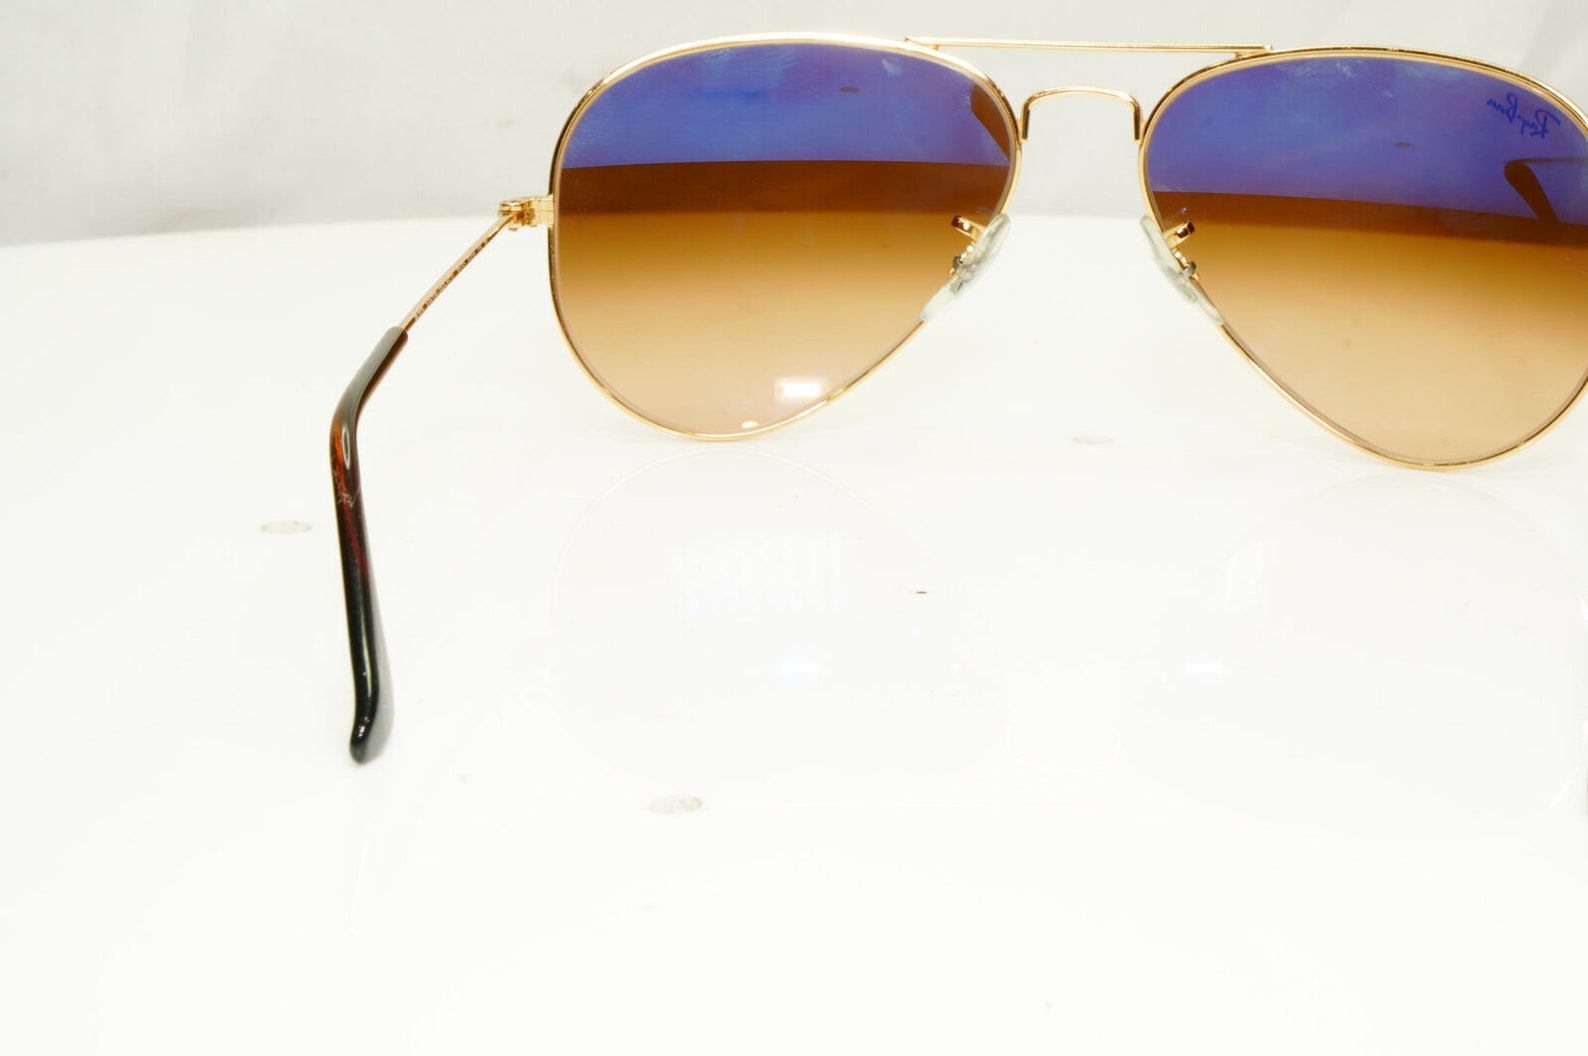 Authentic RayBan Vintage Sunglasses Rb 3025 Aviator Small